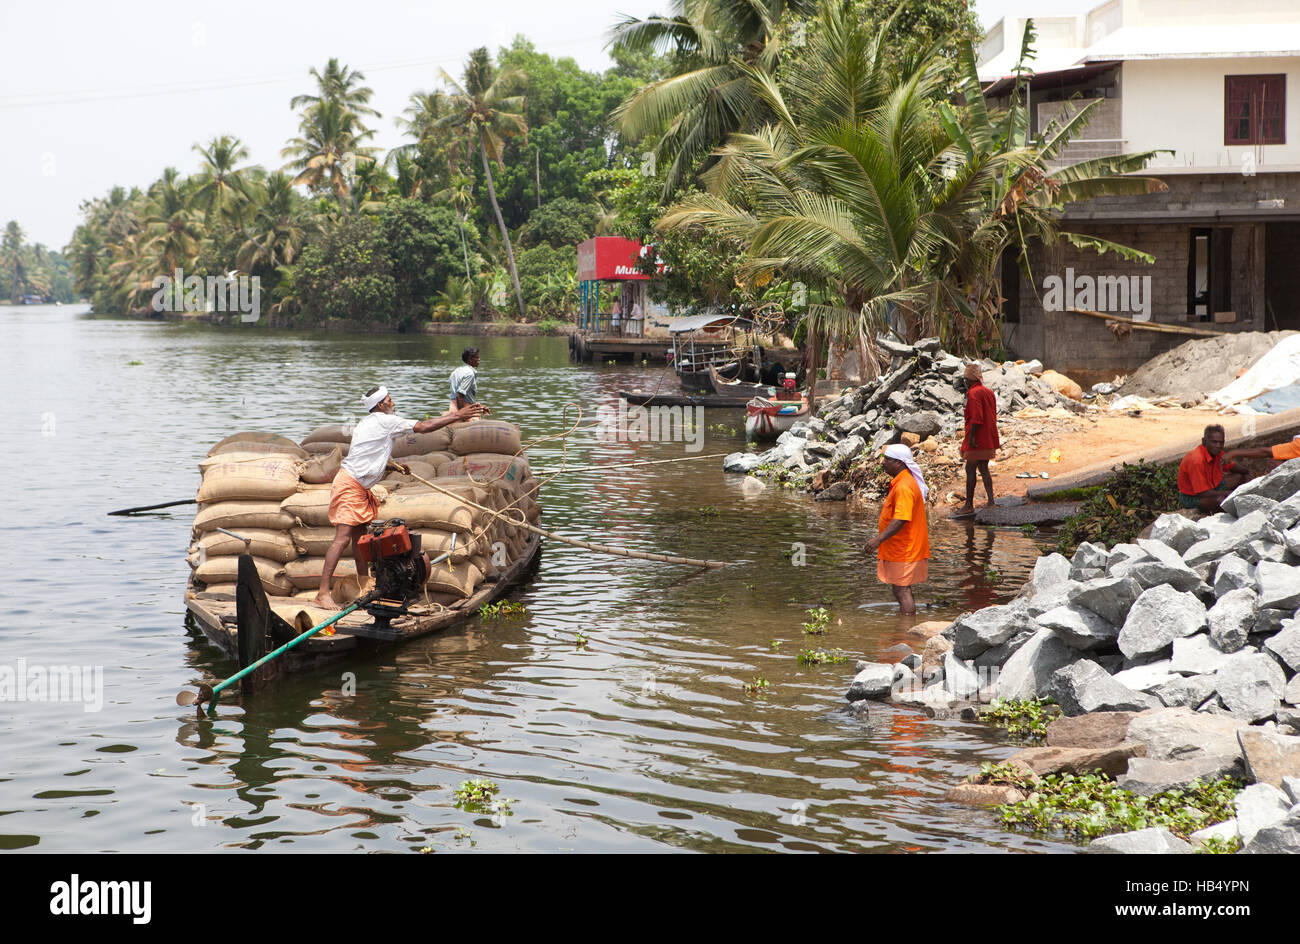 Rice barge landing on shore in Alappuzha (Alleppey), Kerala, India, Stock Photo